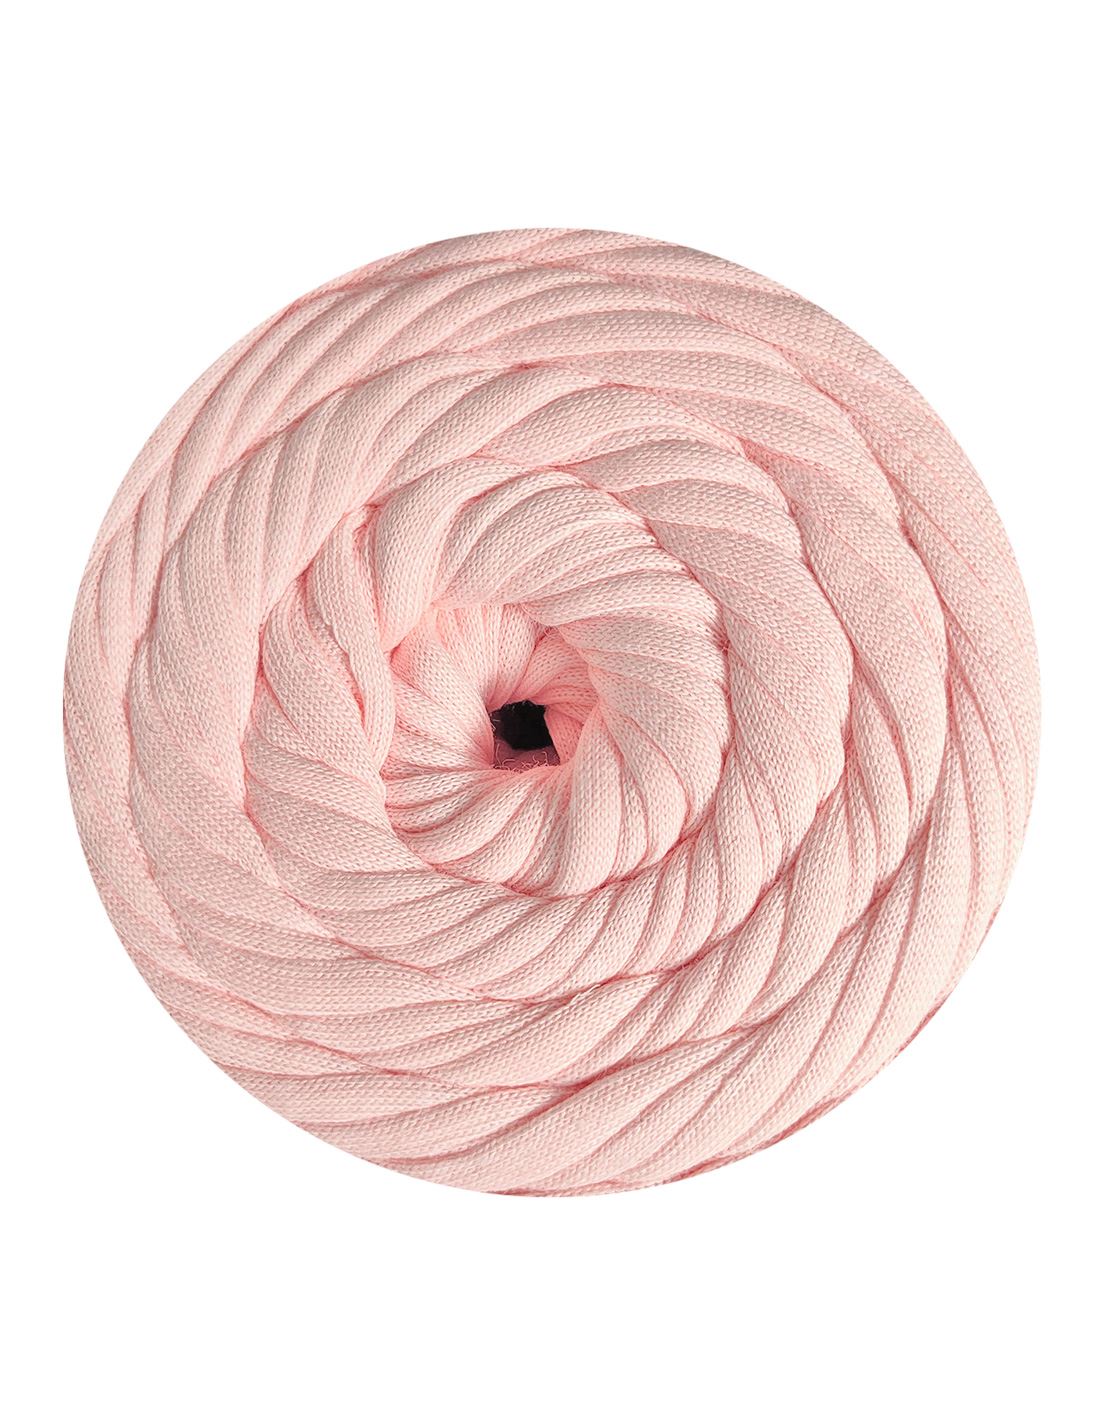 Baby Pink Jersey Be Good t-shirt yarn by Wool and the Gang (500g)